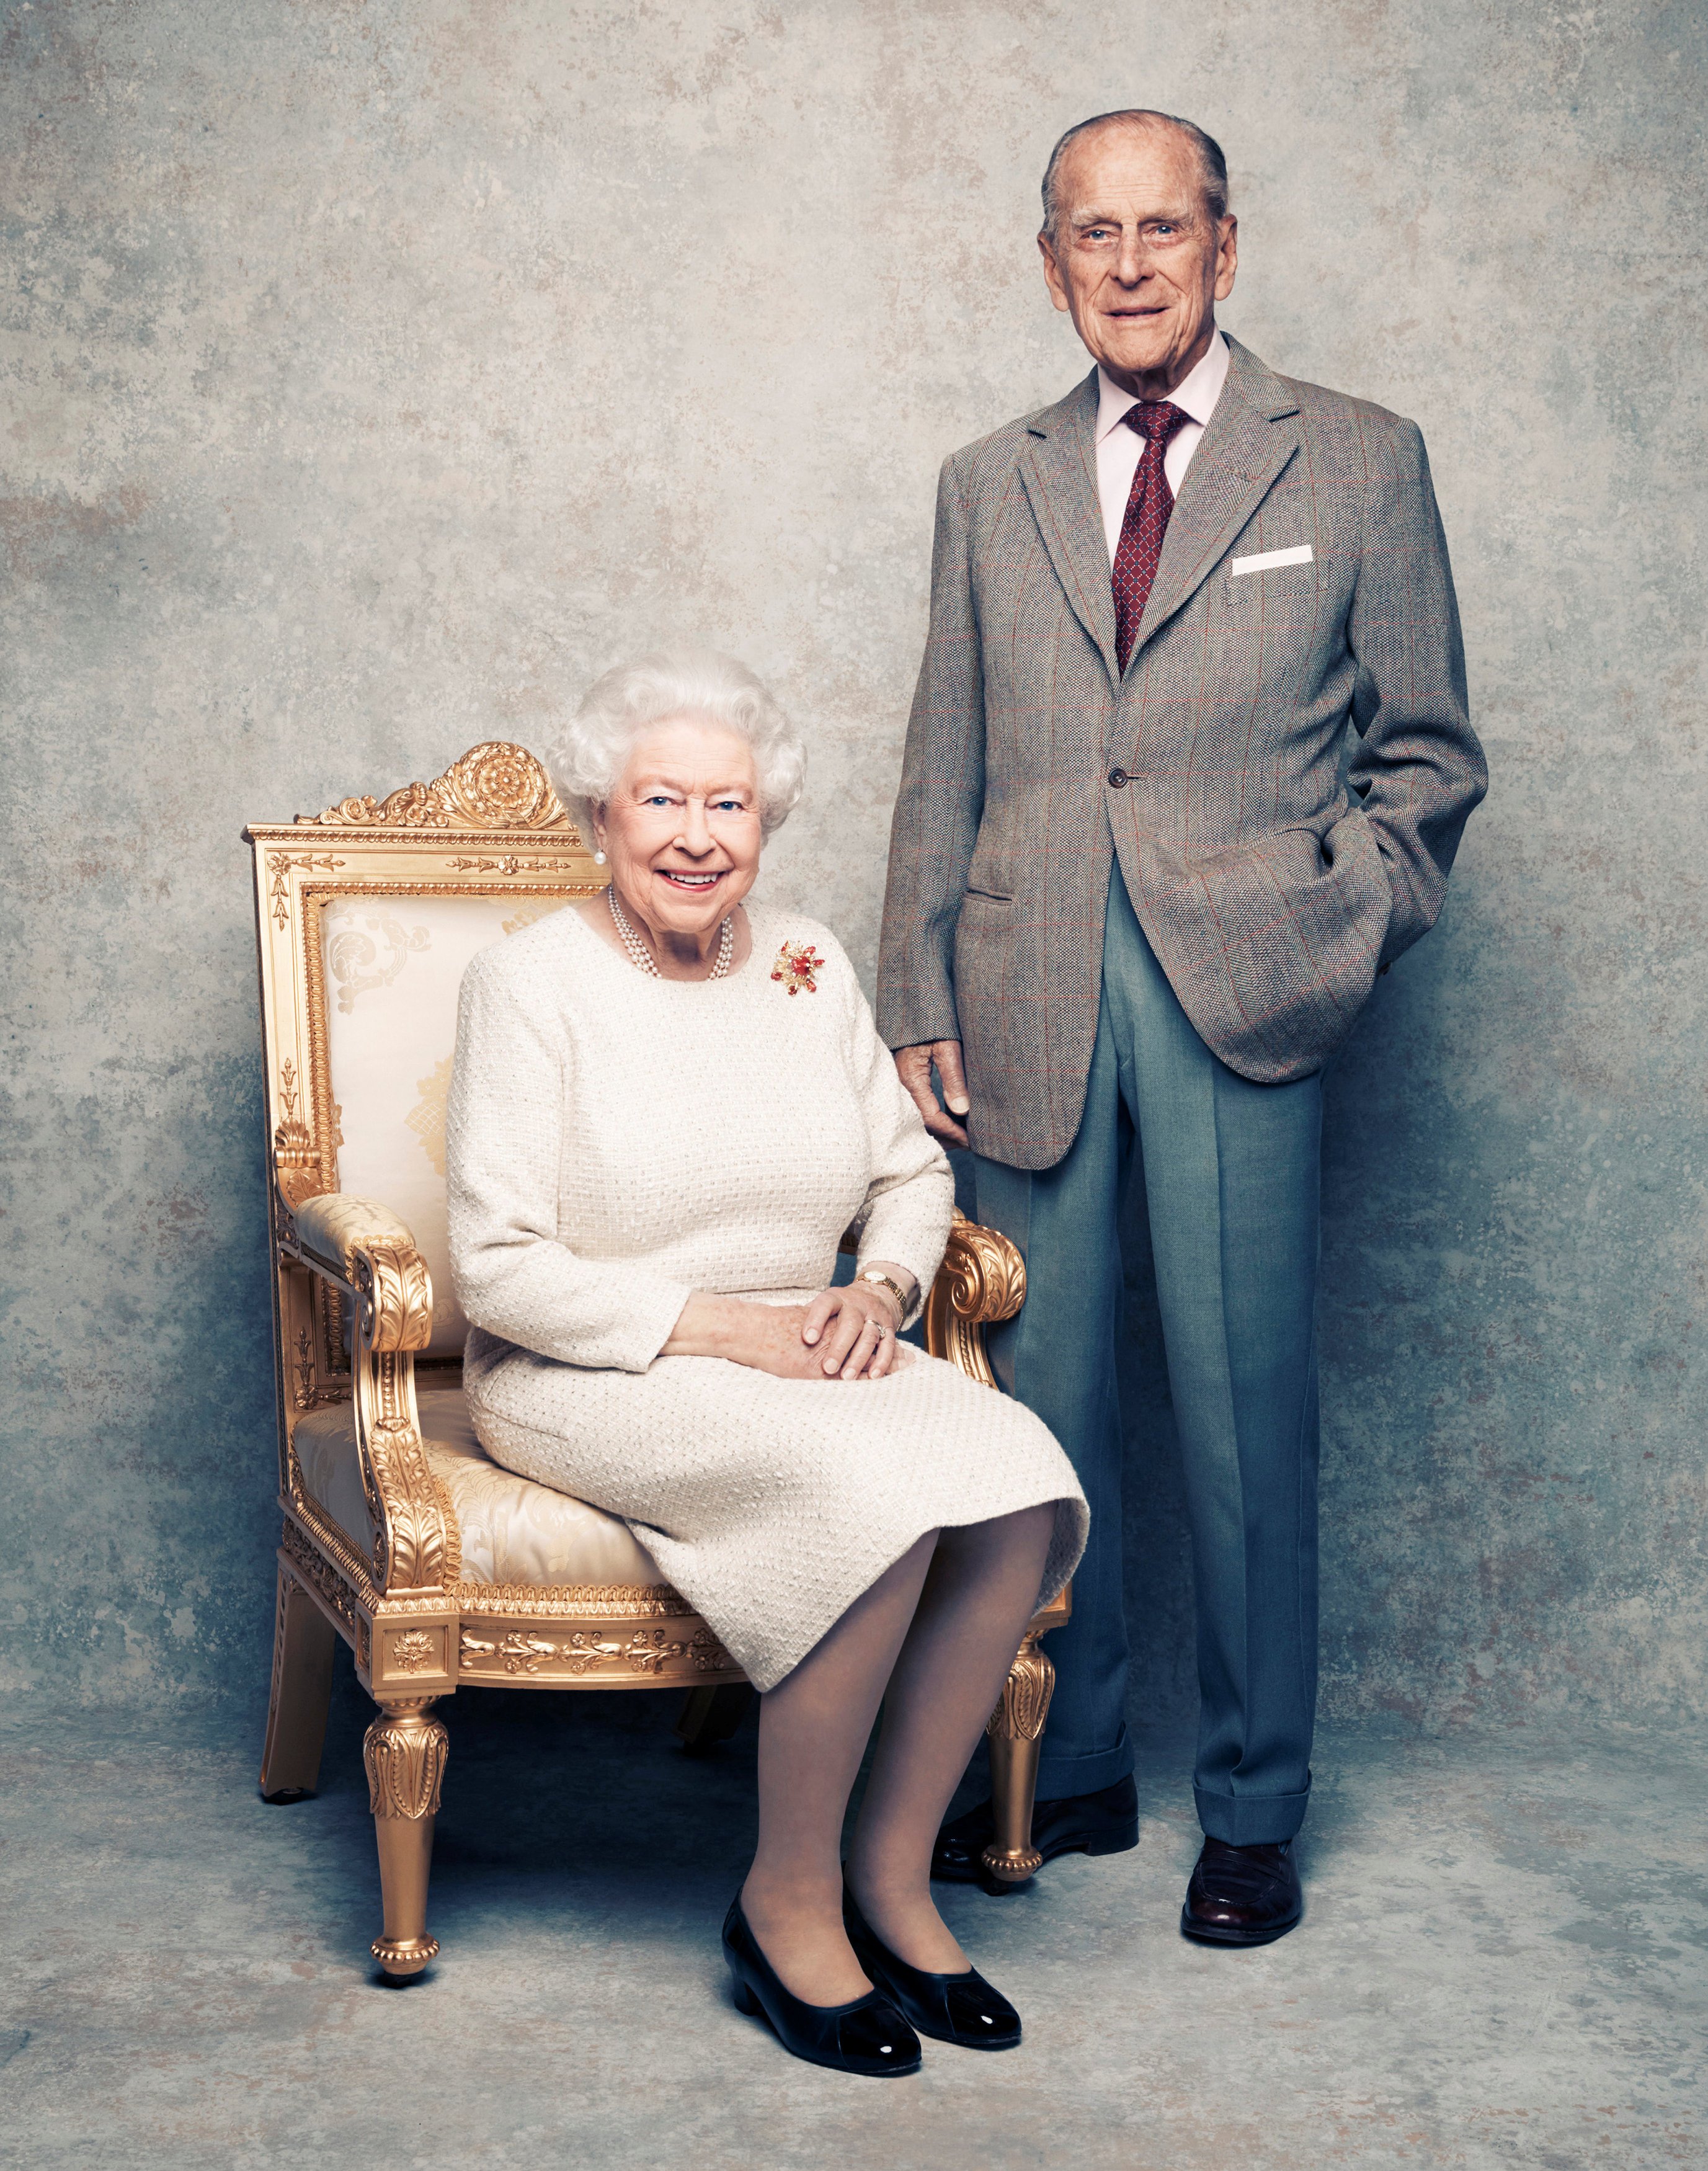 A handout photo shows Britain's Queen Elizabeth and Prince Philip in the White Drawing Room at Windsor Castle in early November, pictured against a platinum-textured backdrop, in celebration of their platinum wedding anniversary on November 20, 2017. Matt Holyoak/CameraPress/PA Wire/Handout via REUTERS (Matt Holyoak—CameraPress/PA Wire/Reuters)